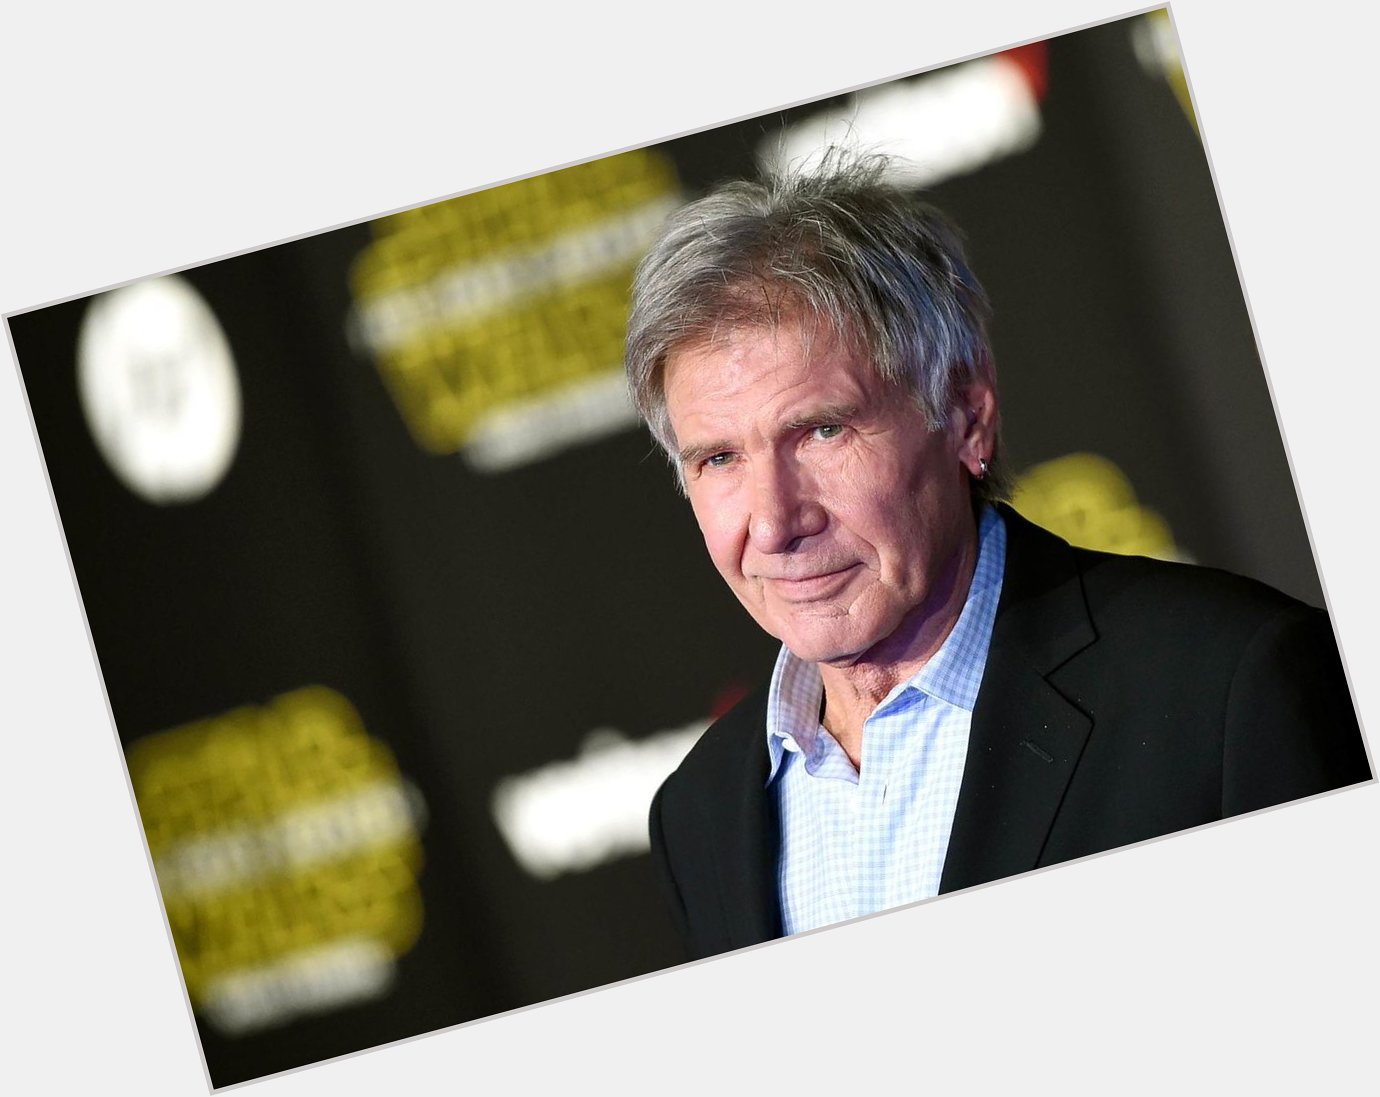 Happy Birthday to the living Legend Harrison Ford!
Born: July 13th, 1942 